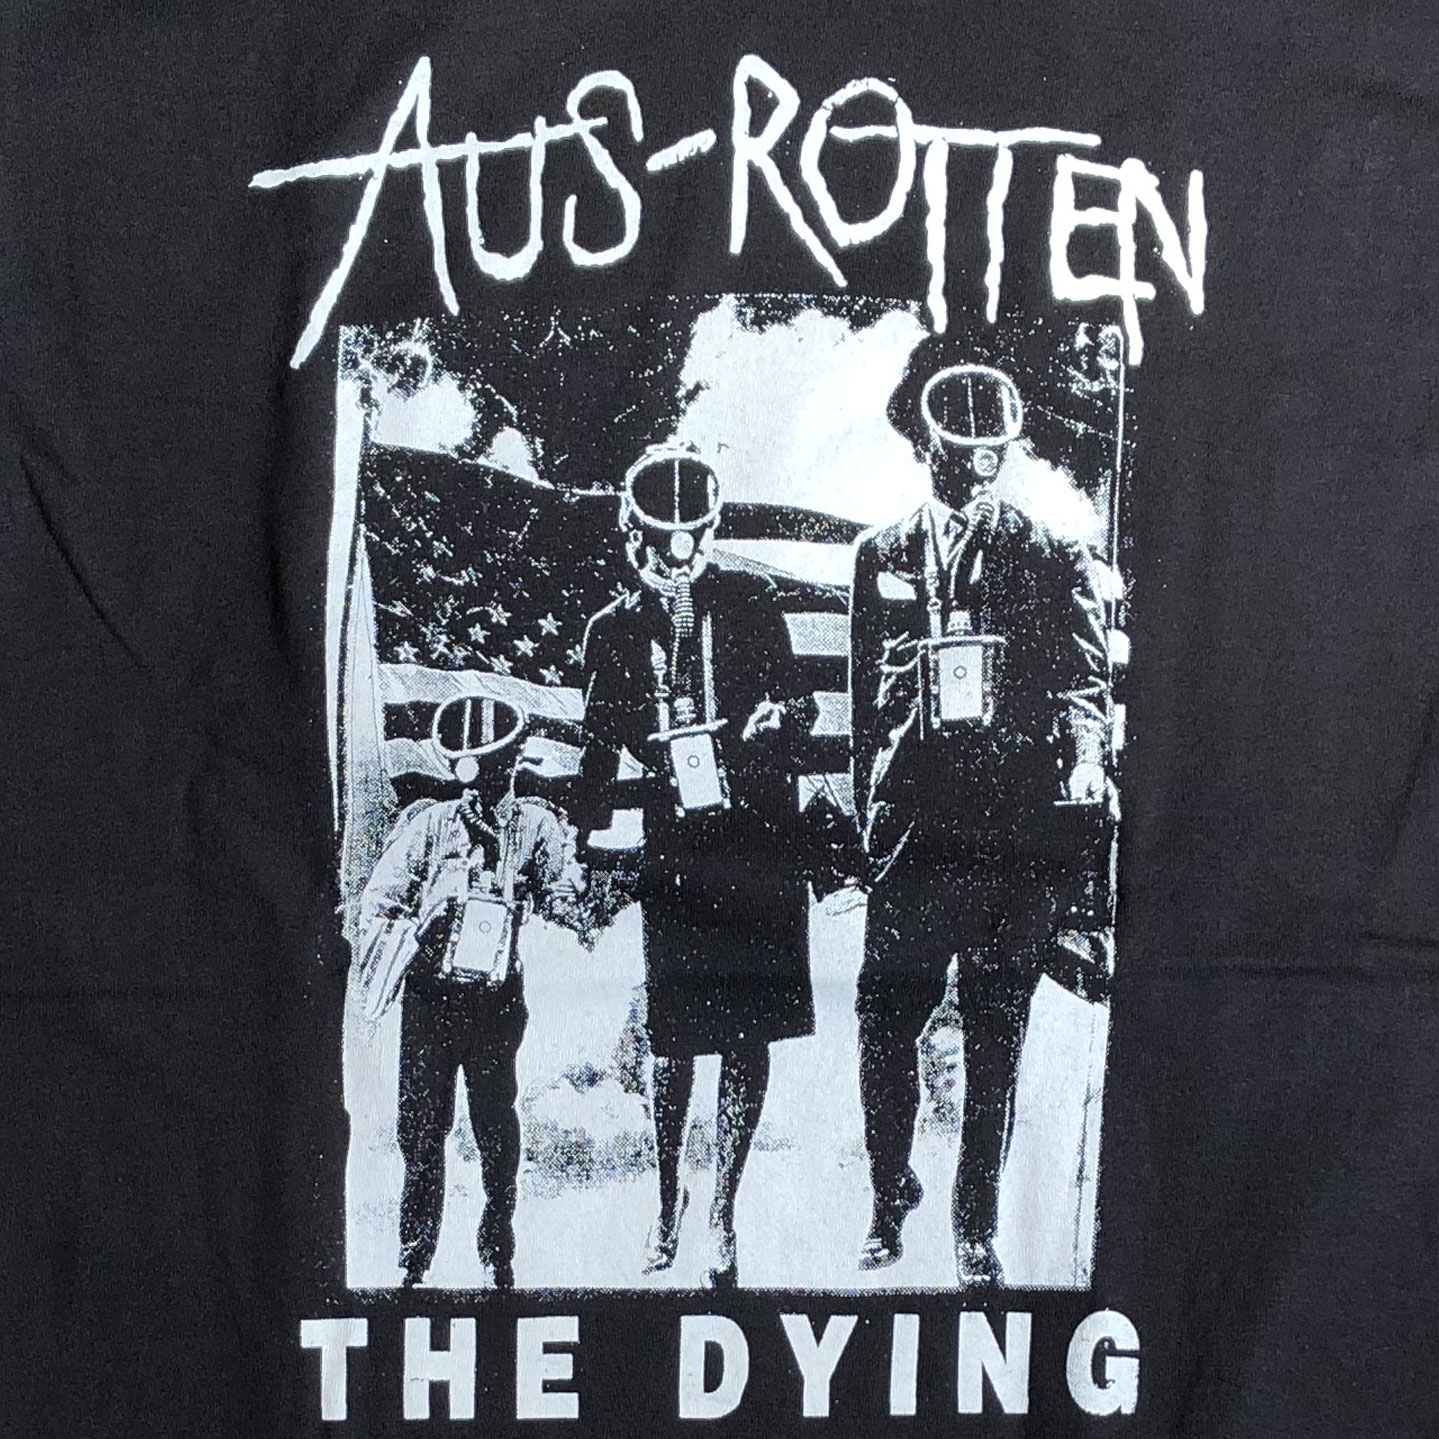 AUS-ROTTEN Tシャツ THE DYING